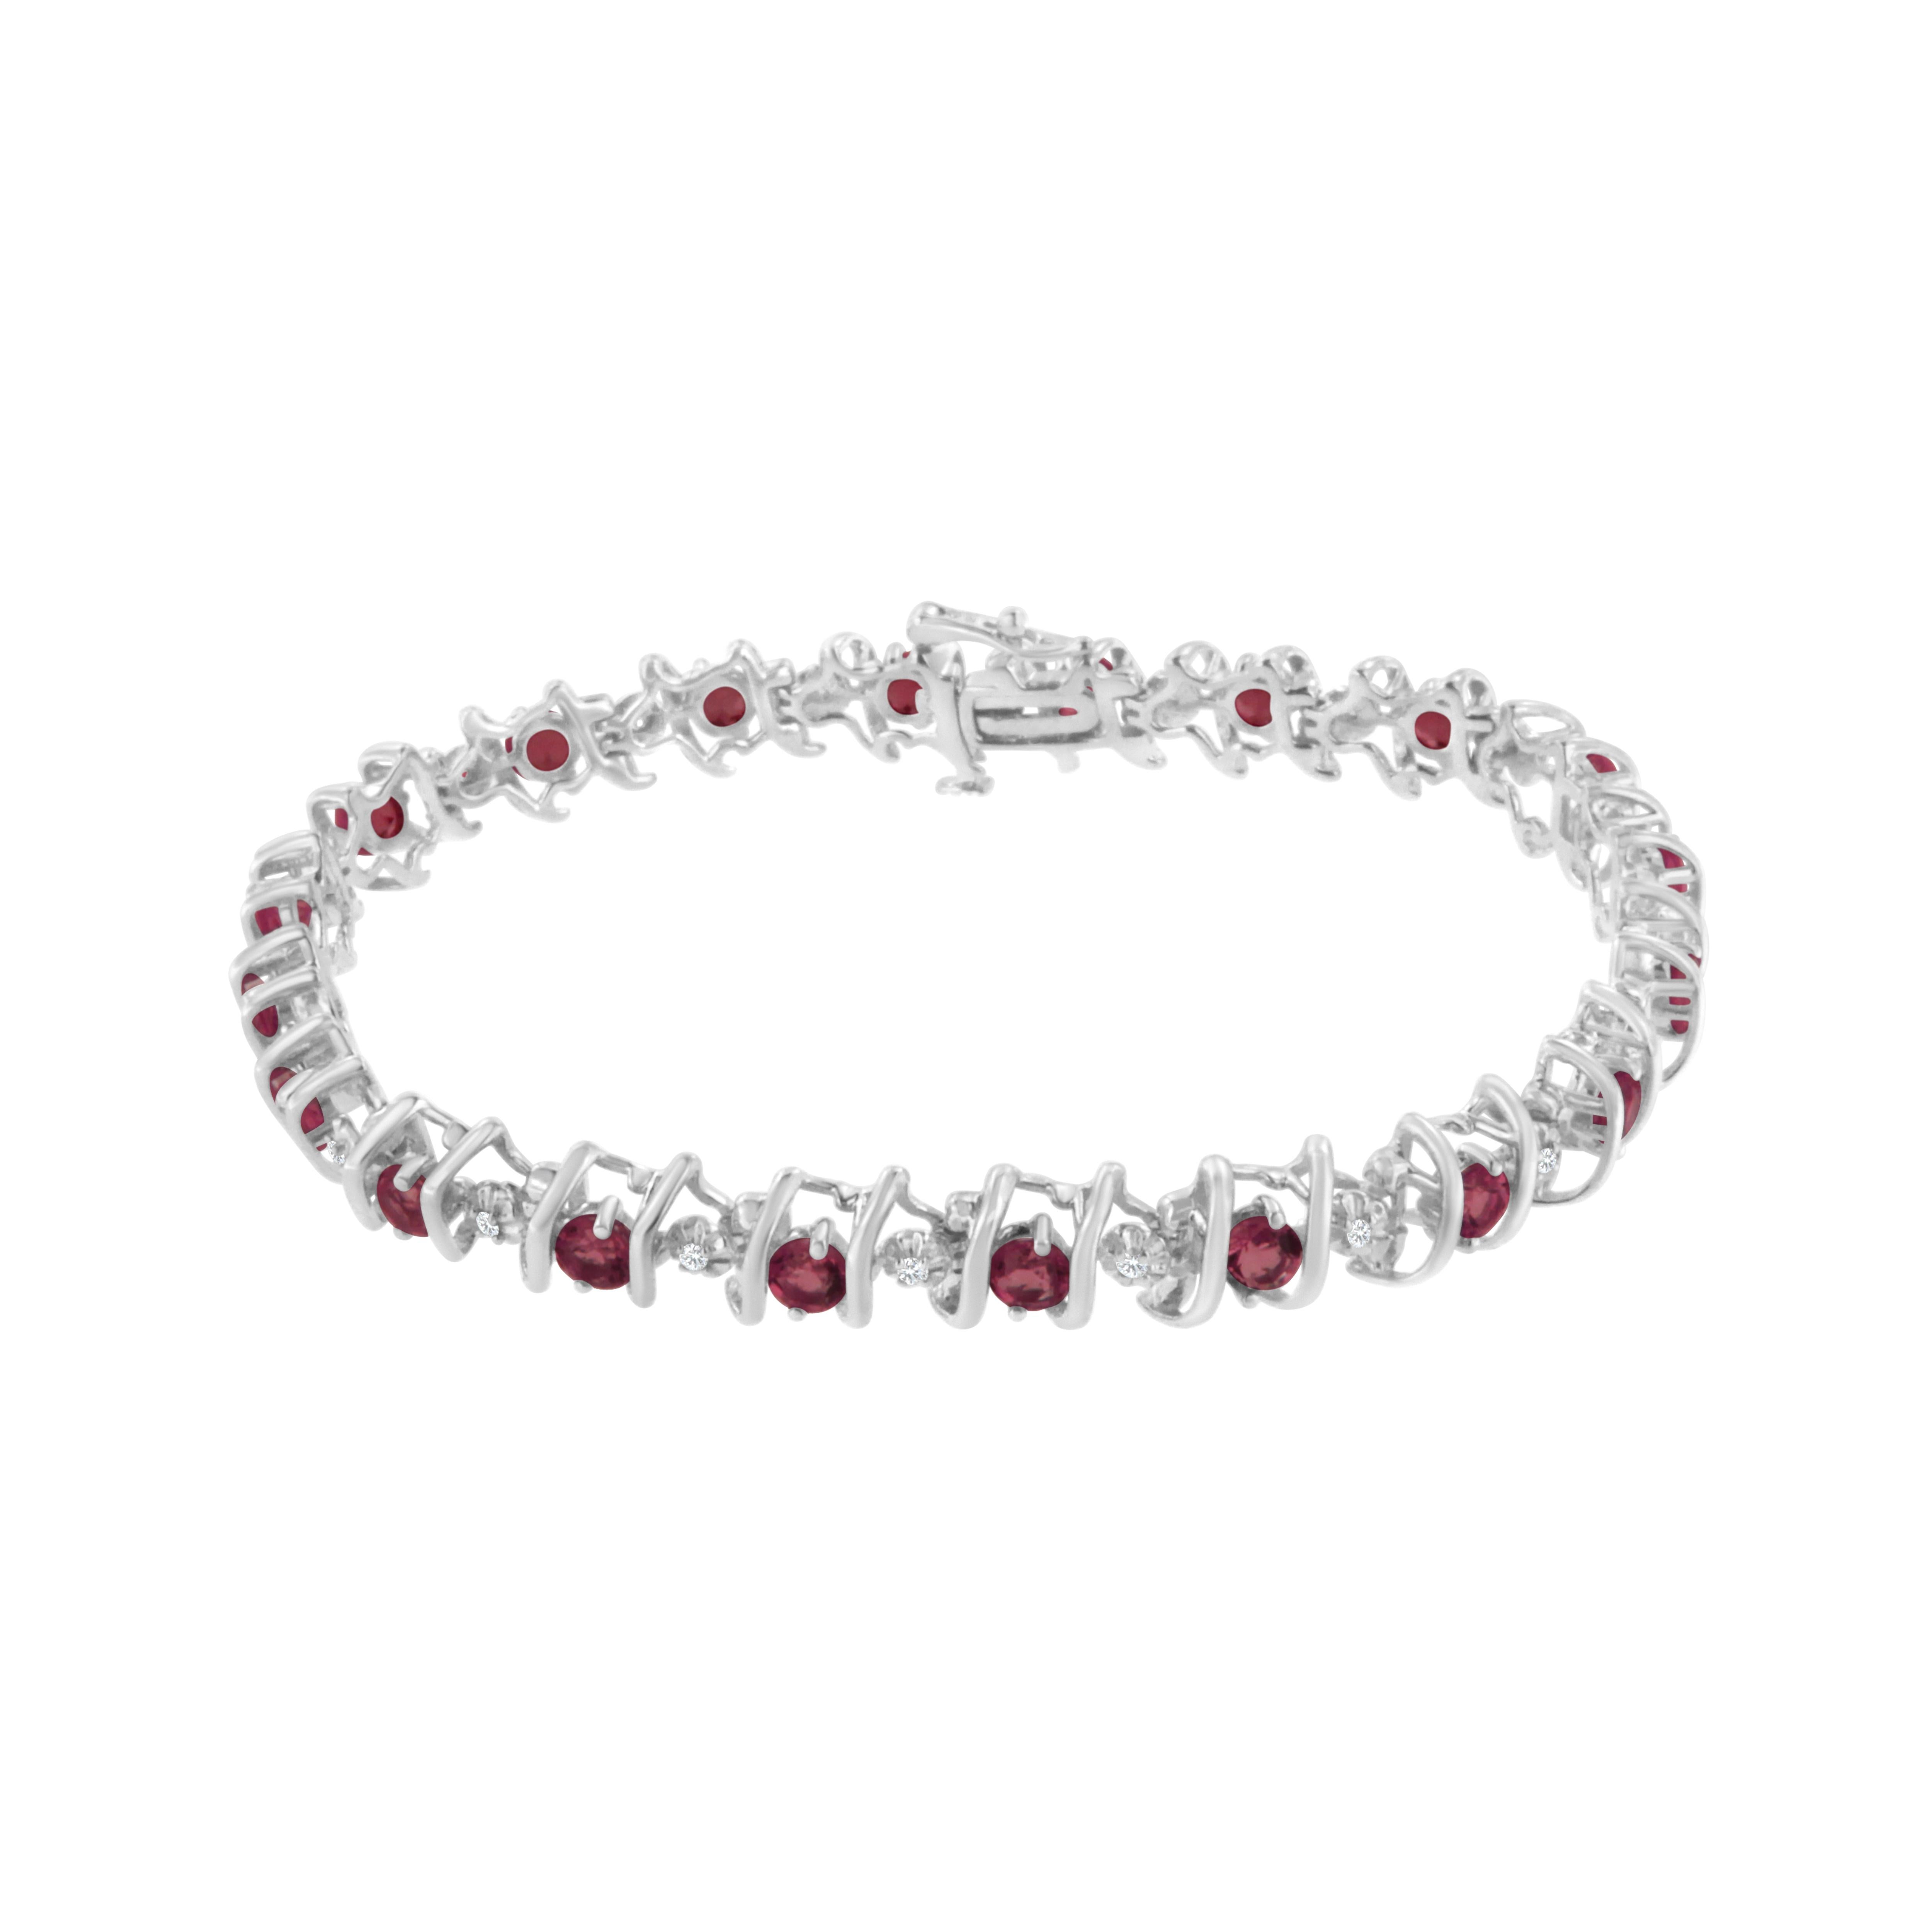 Red rubies and sparkling white diamonds are set in a S-link tennis bracelet crafted in cool sterling silver. The bracelet features 20 sparkling diamonds, which have a total weight of .15 carats. The 20 lab-created rubies add brilliant color to the